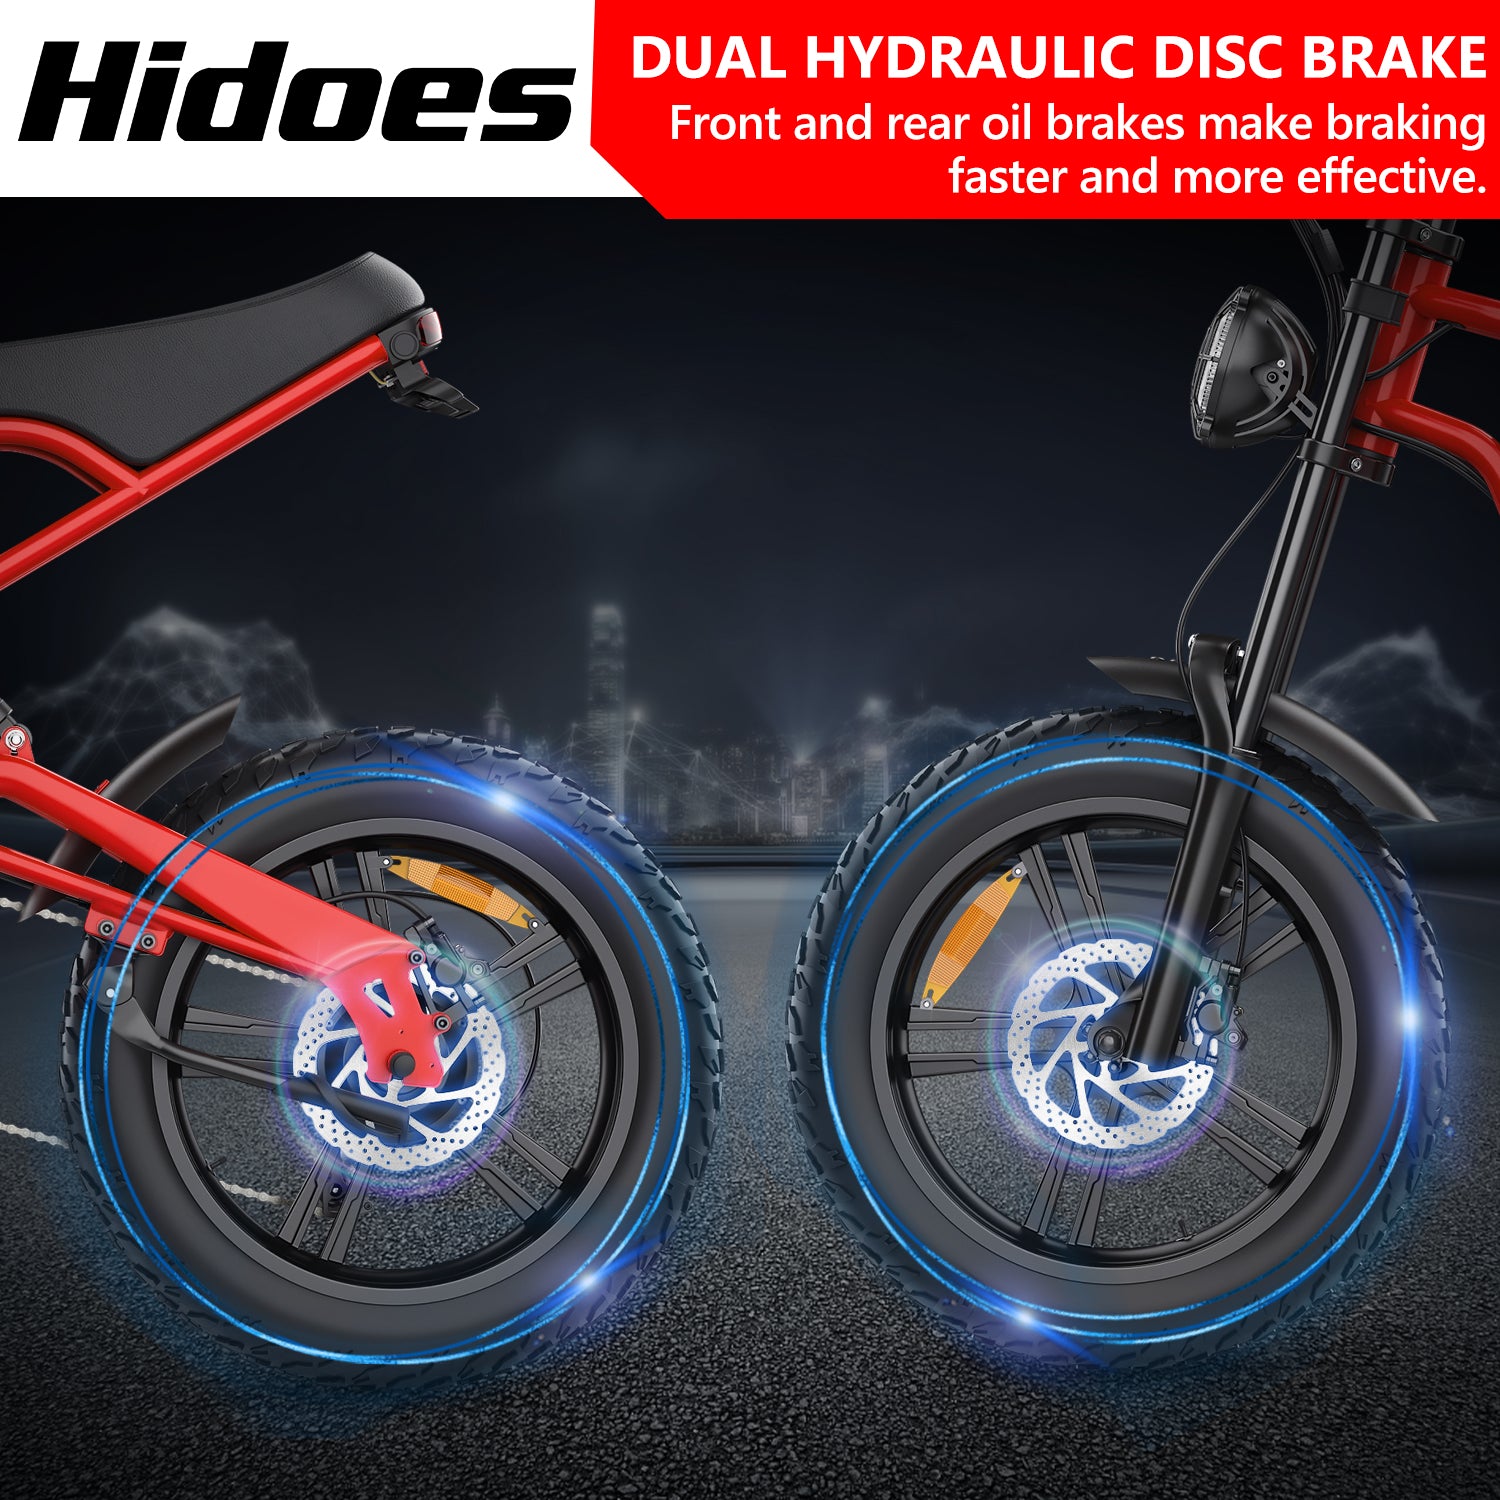 Hidoes B6 Fat bike with front and rear oil disc brake, E-ABS